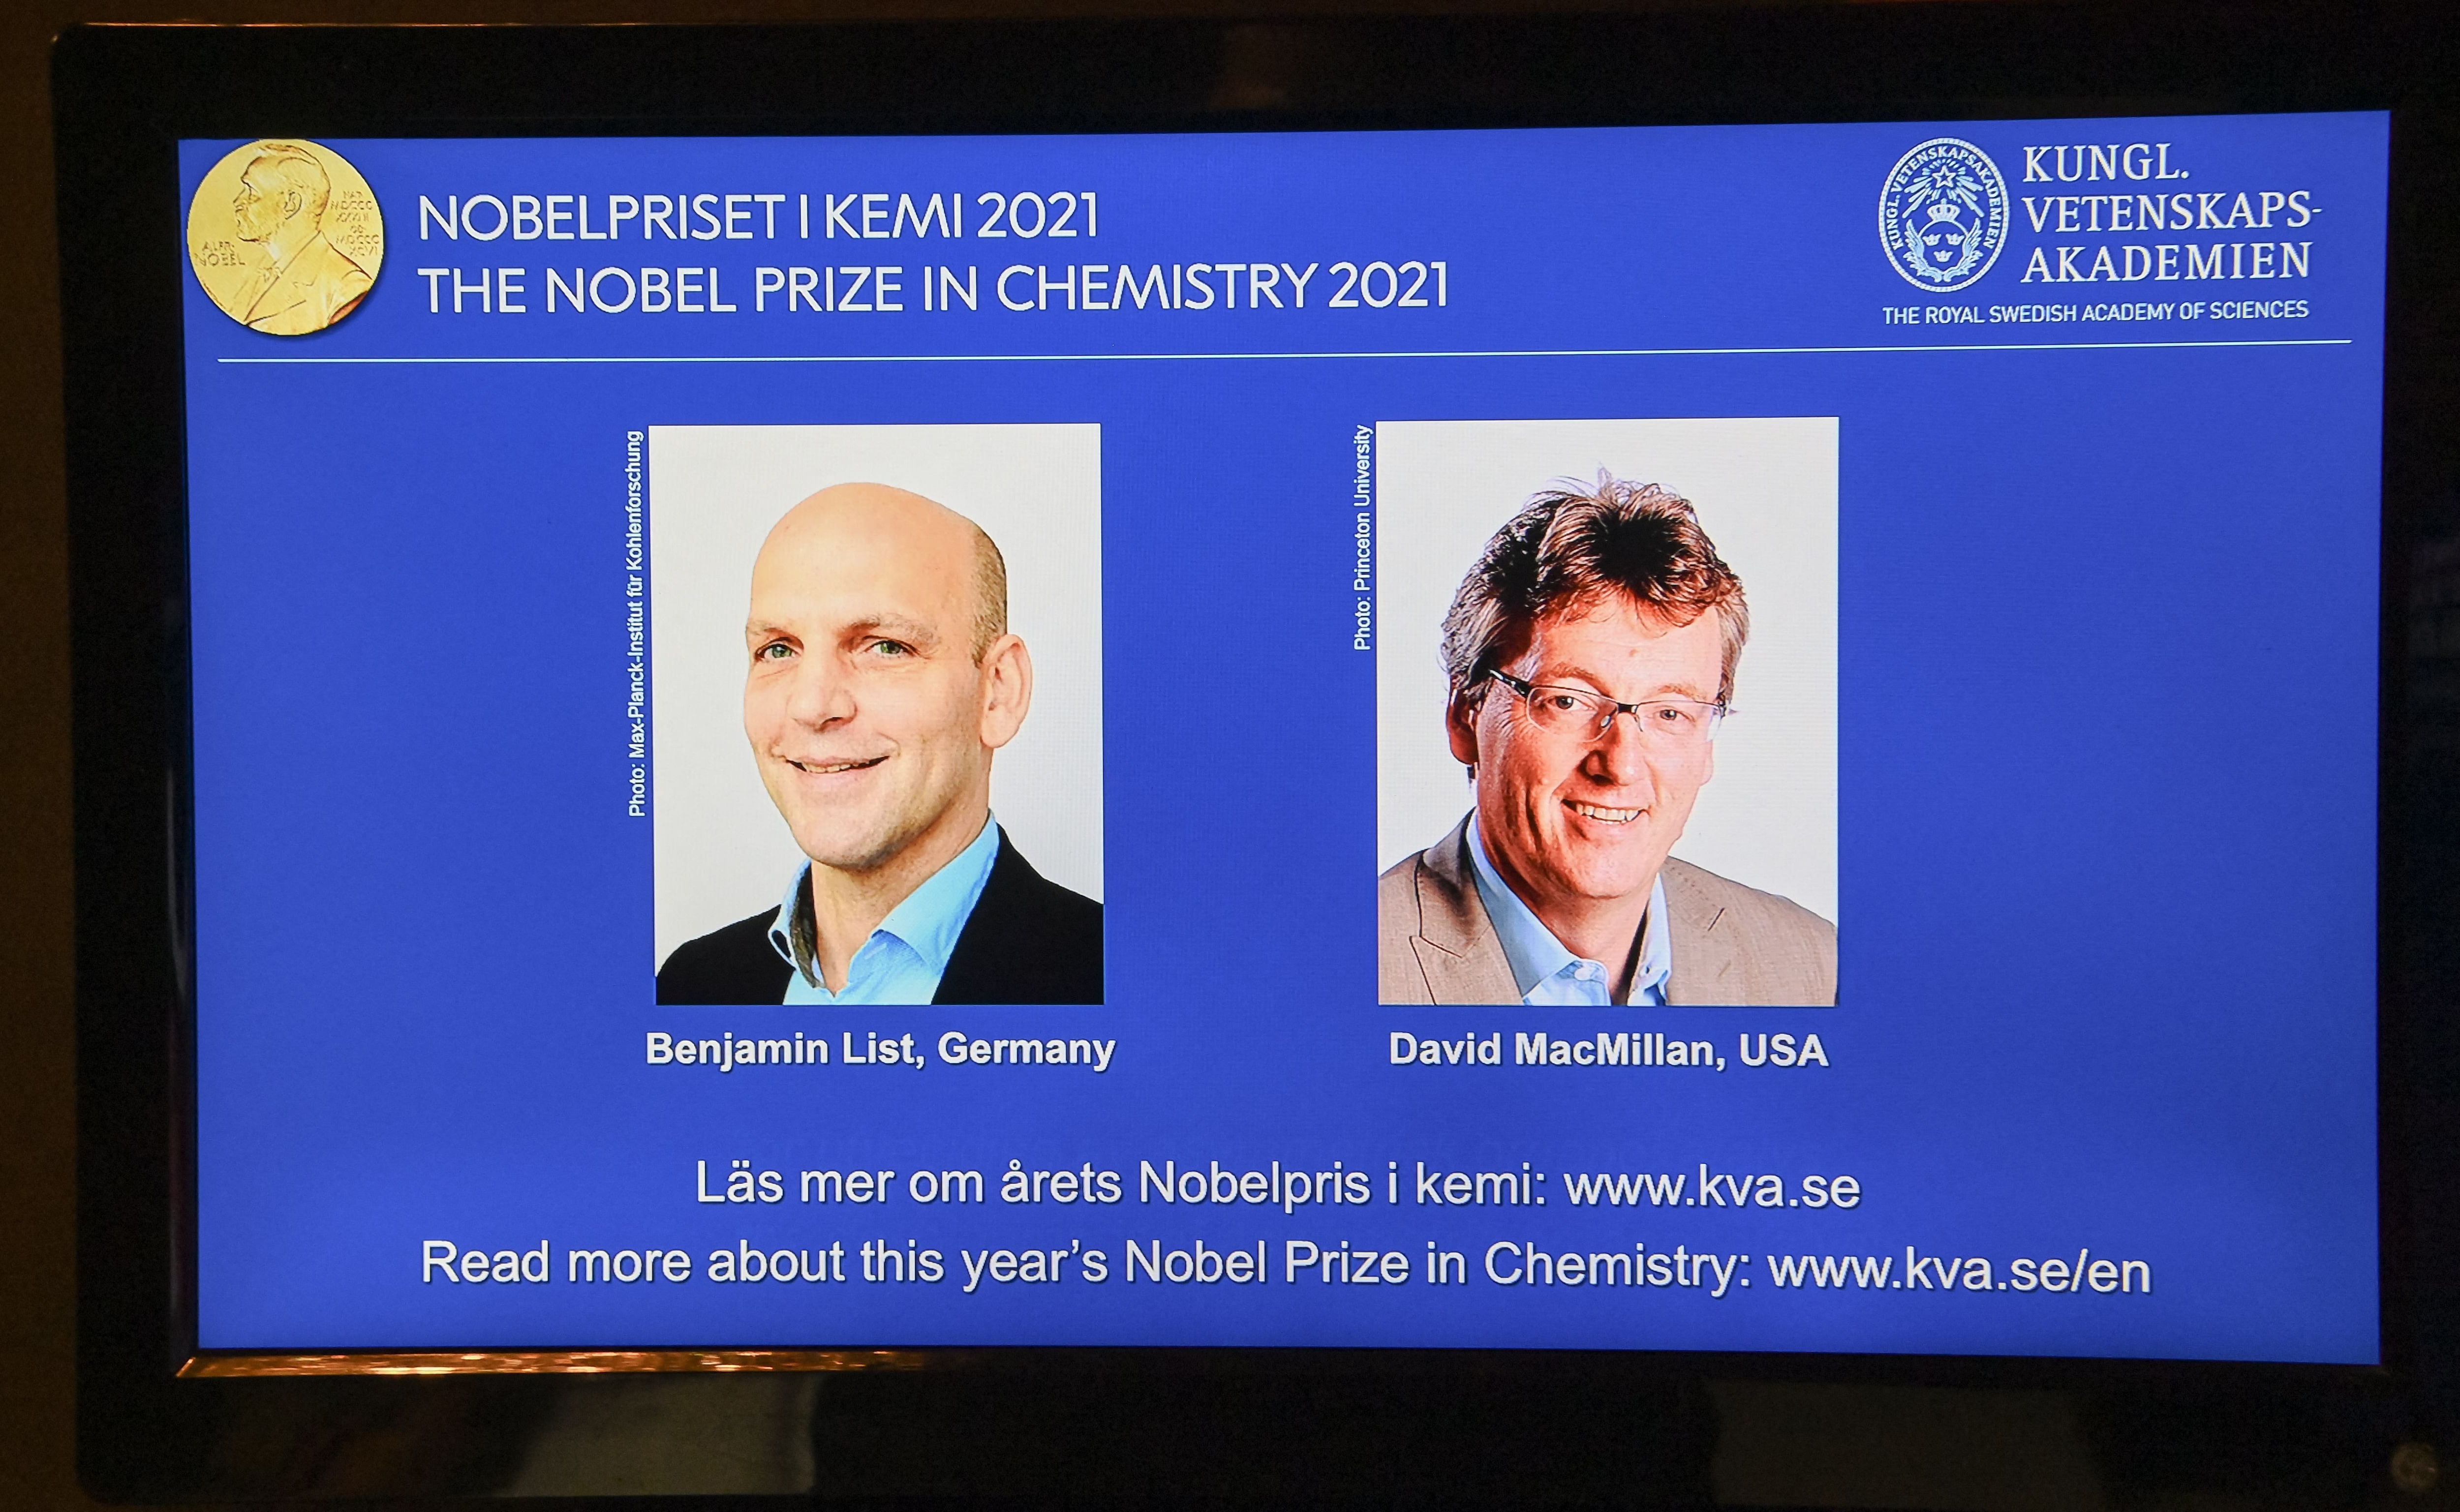 Benjamin List and David MacMillan, who are the winners of the 2021 Nobel Prize in Chemistry